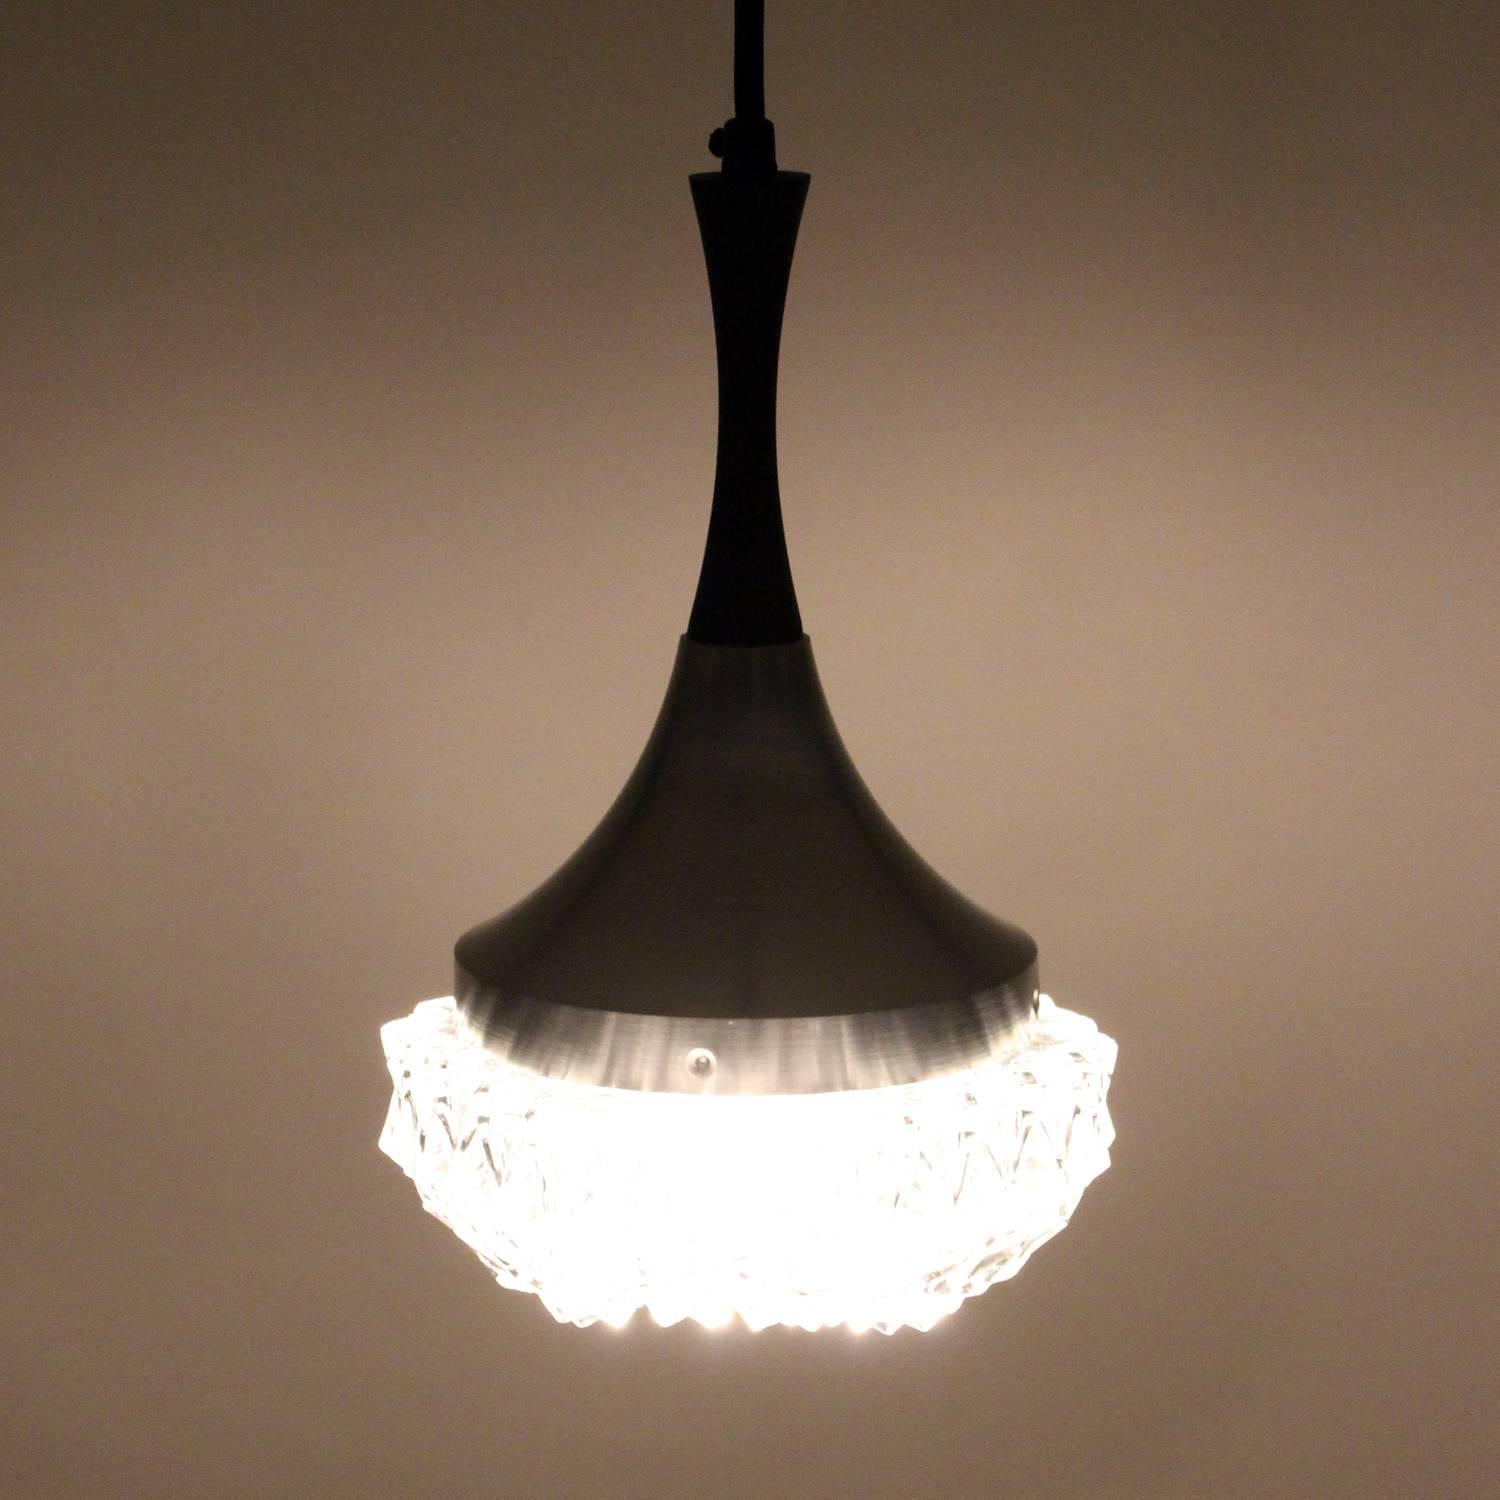 20th Century Glass with Rosewood Pendant Light, circa 1960s Pressed Glass Hanging Lamp